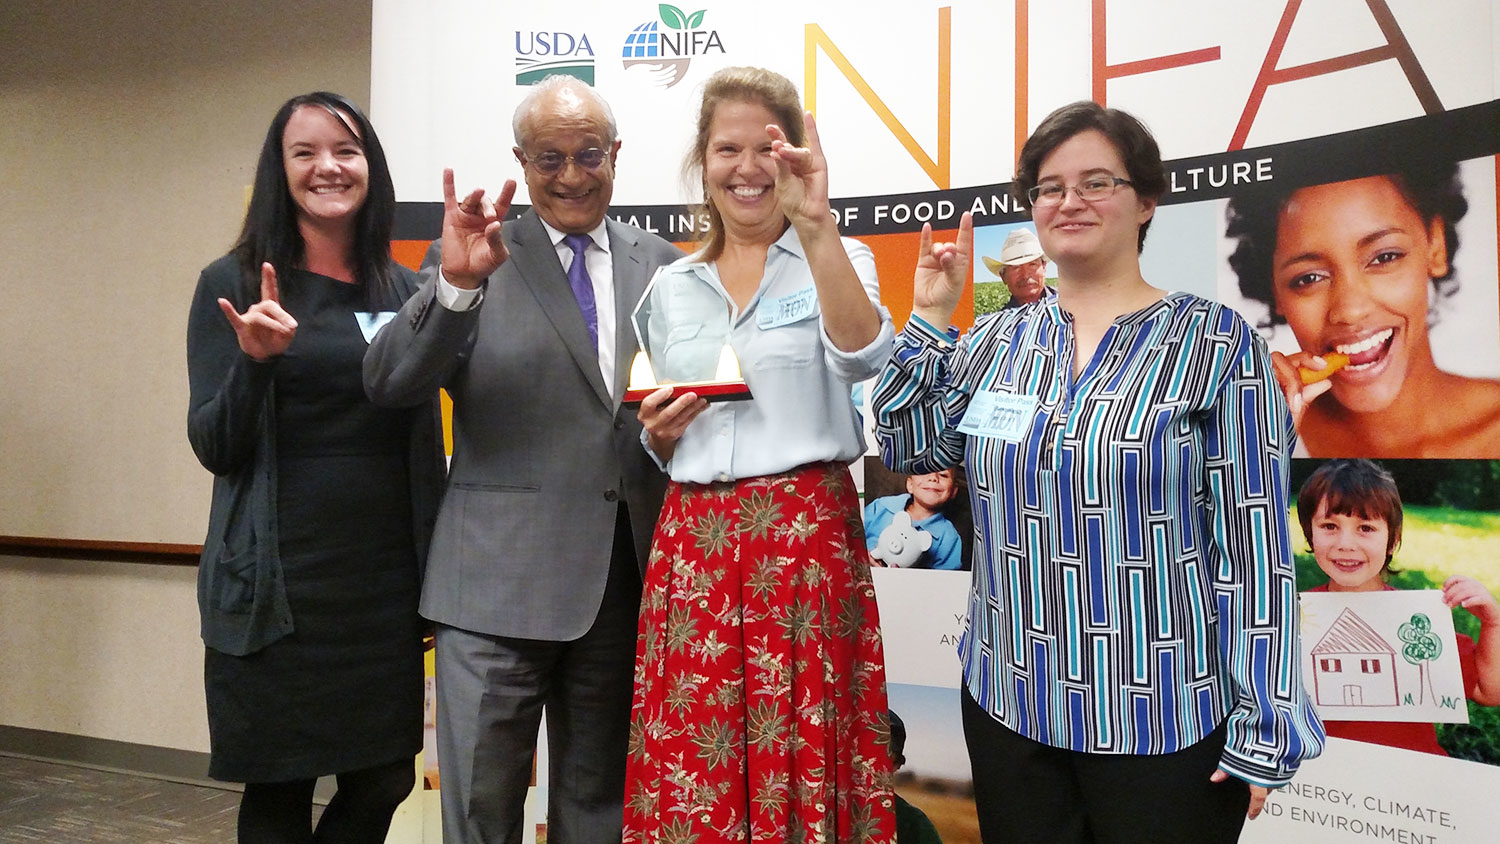 Celebrating Wolfpack-style at the NIFA awards ceremony were (left to right): Rebecca Goulter, NoroCORE assistant director; Sonny Ramaswamy, NIFA director; Lee-Ann Jaykus, NoroCORE director; and Elizabeth Bradshaw, NoroCORE communications director.